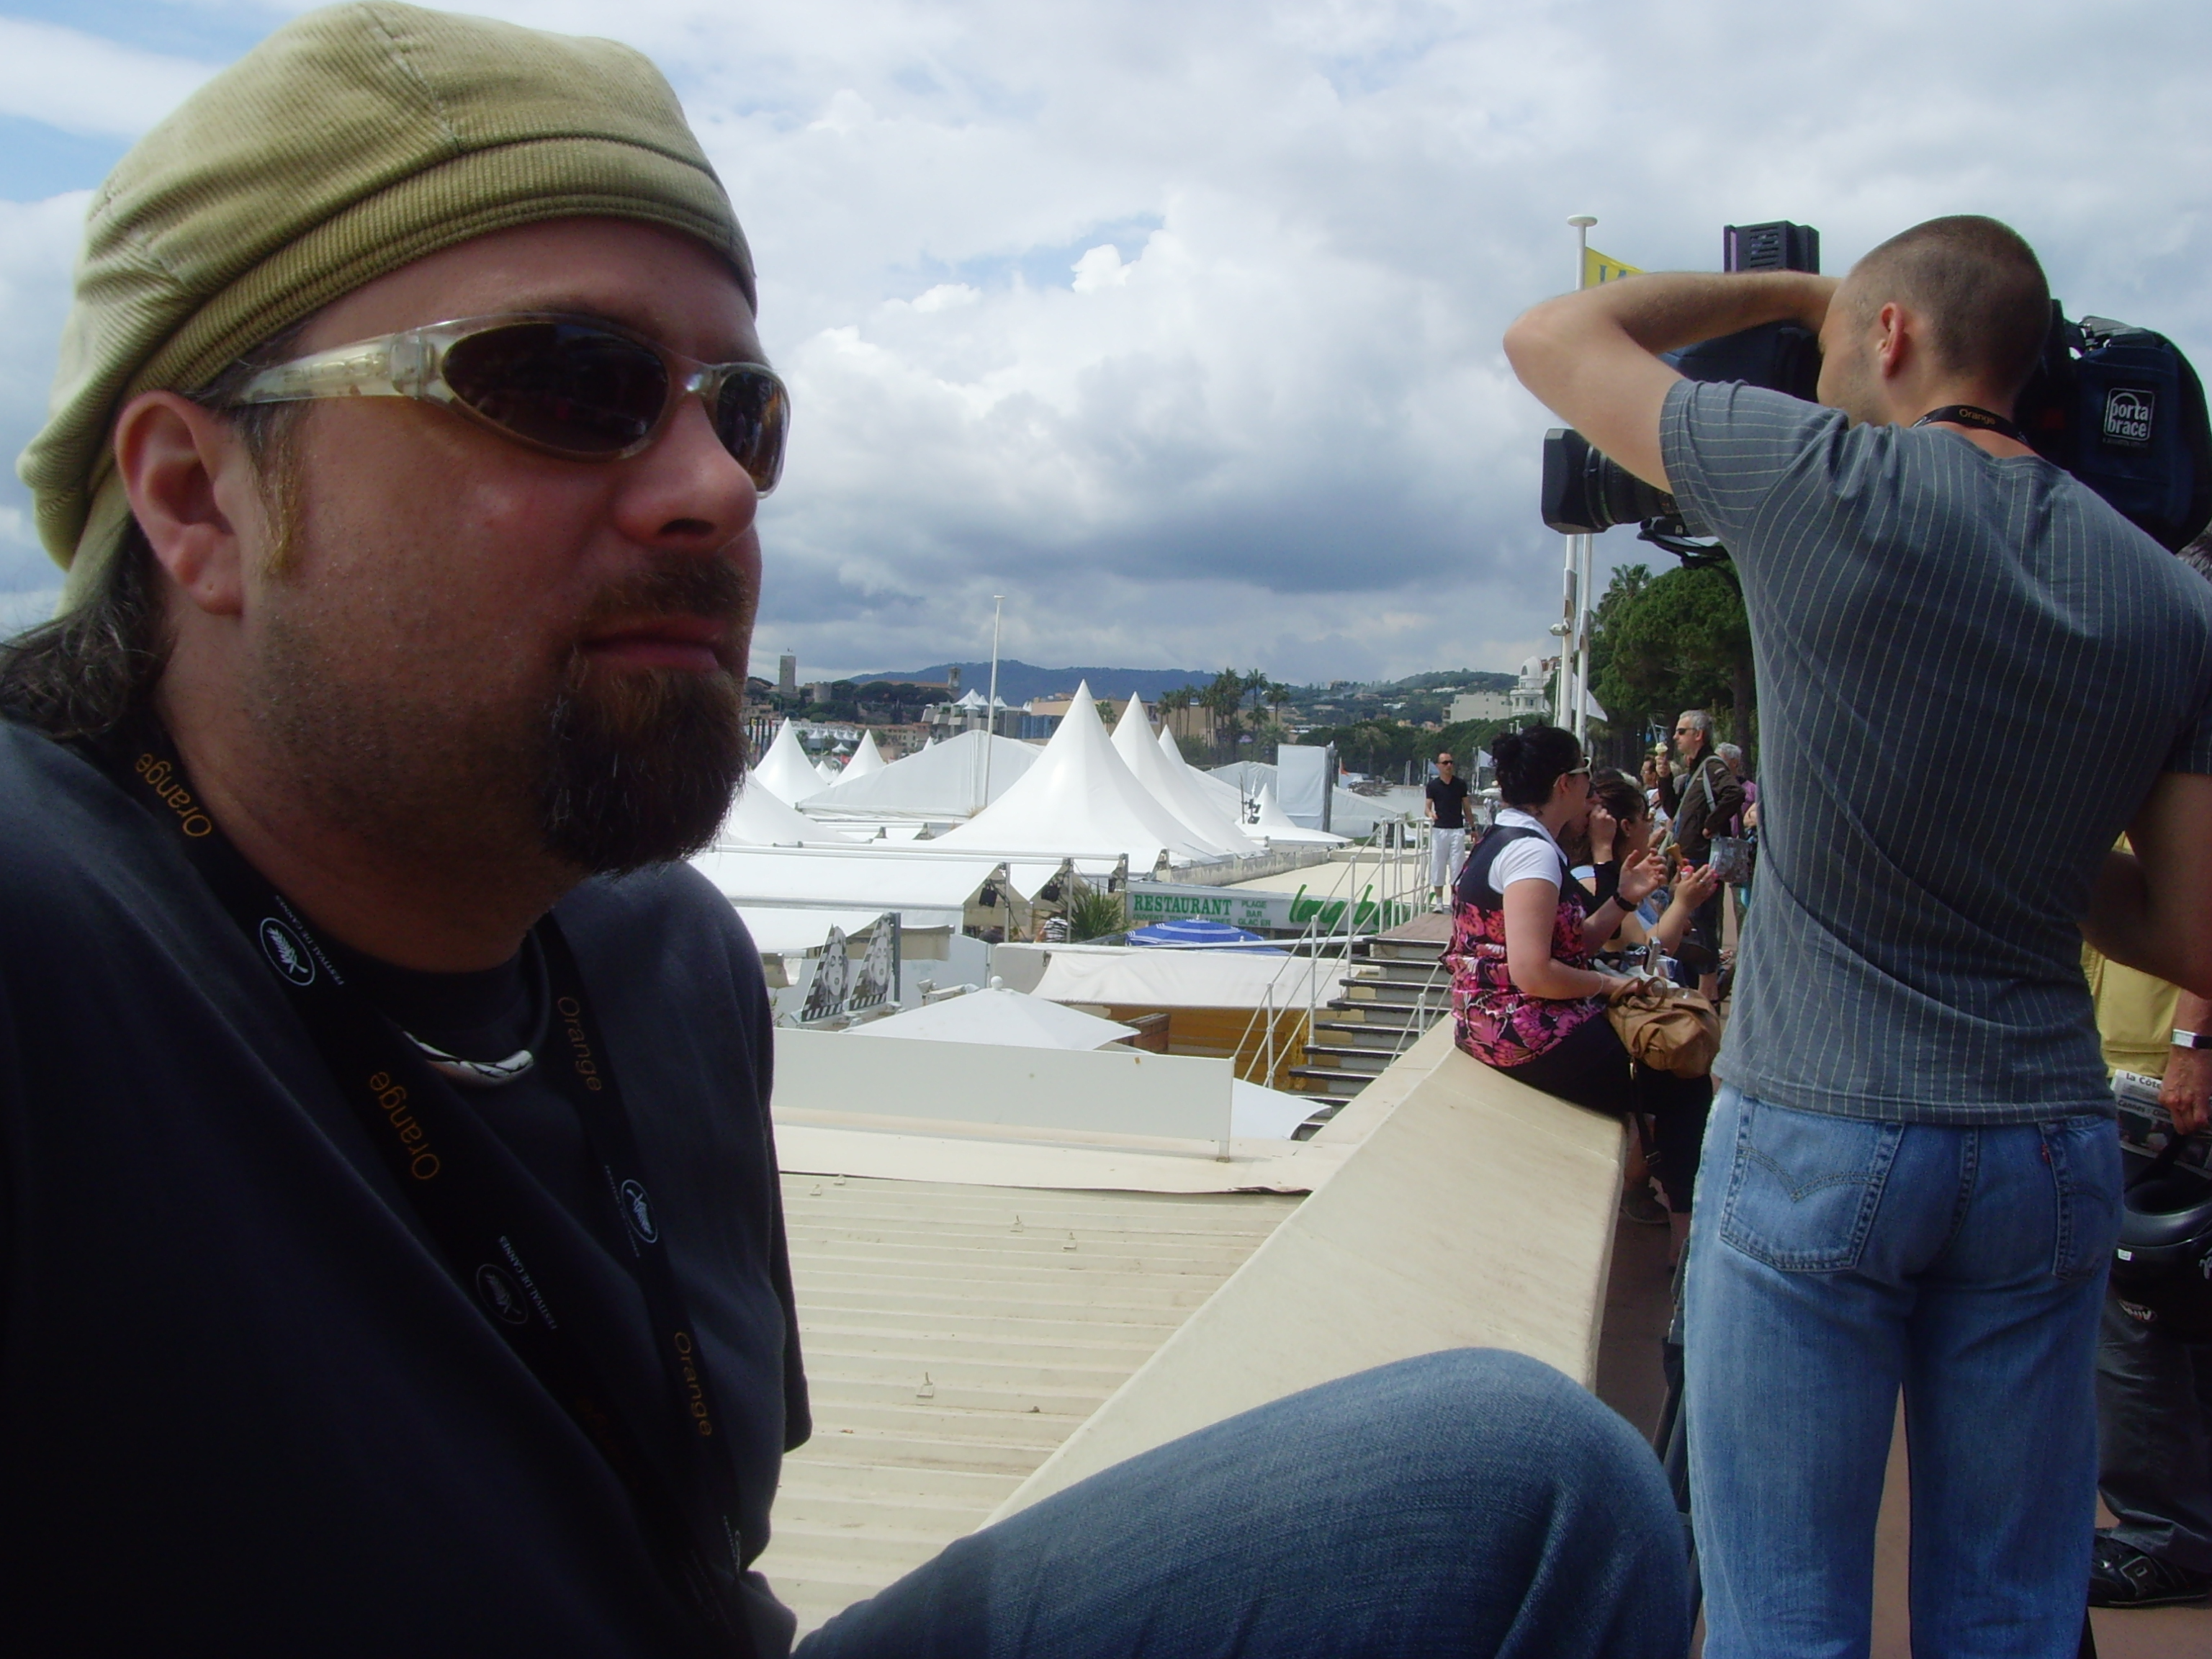 Director Dale Corlett on location at the 61st Festival de Cannes